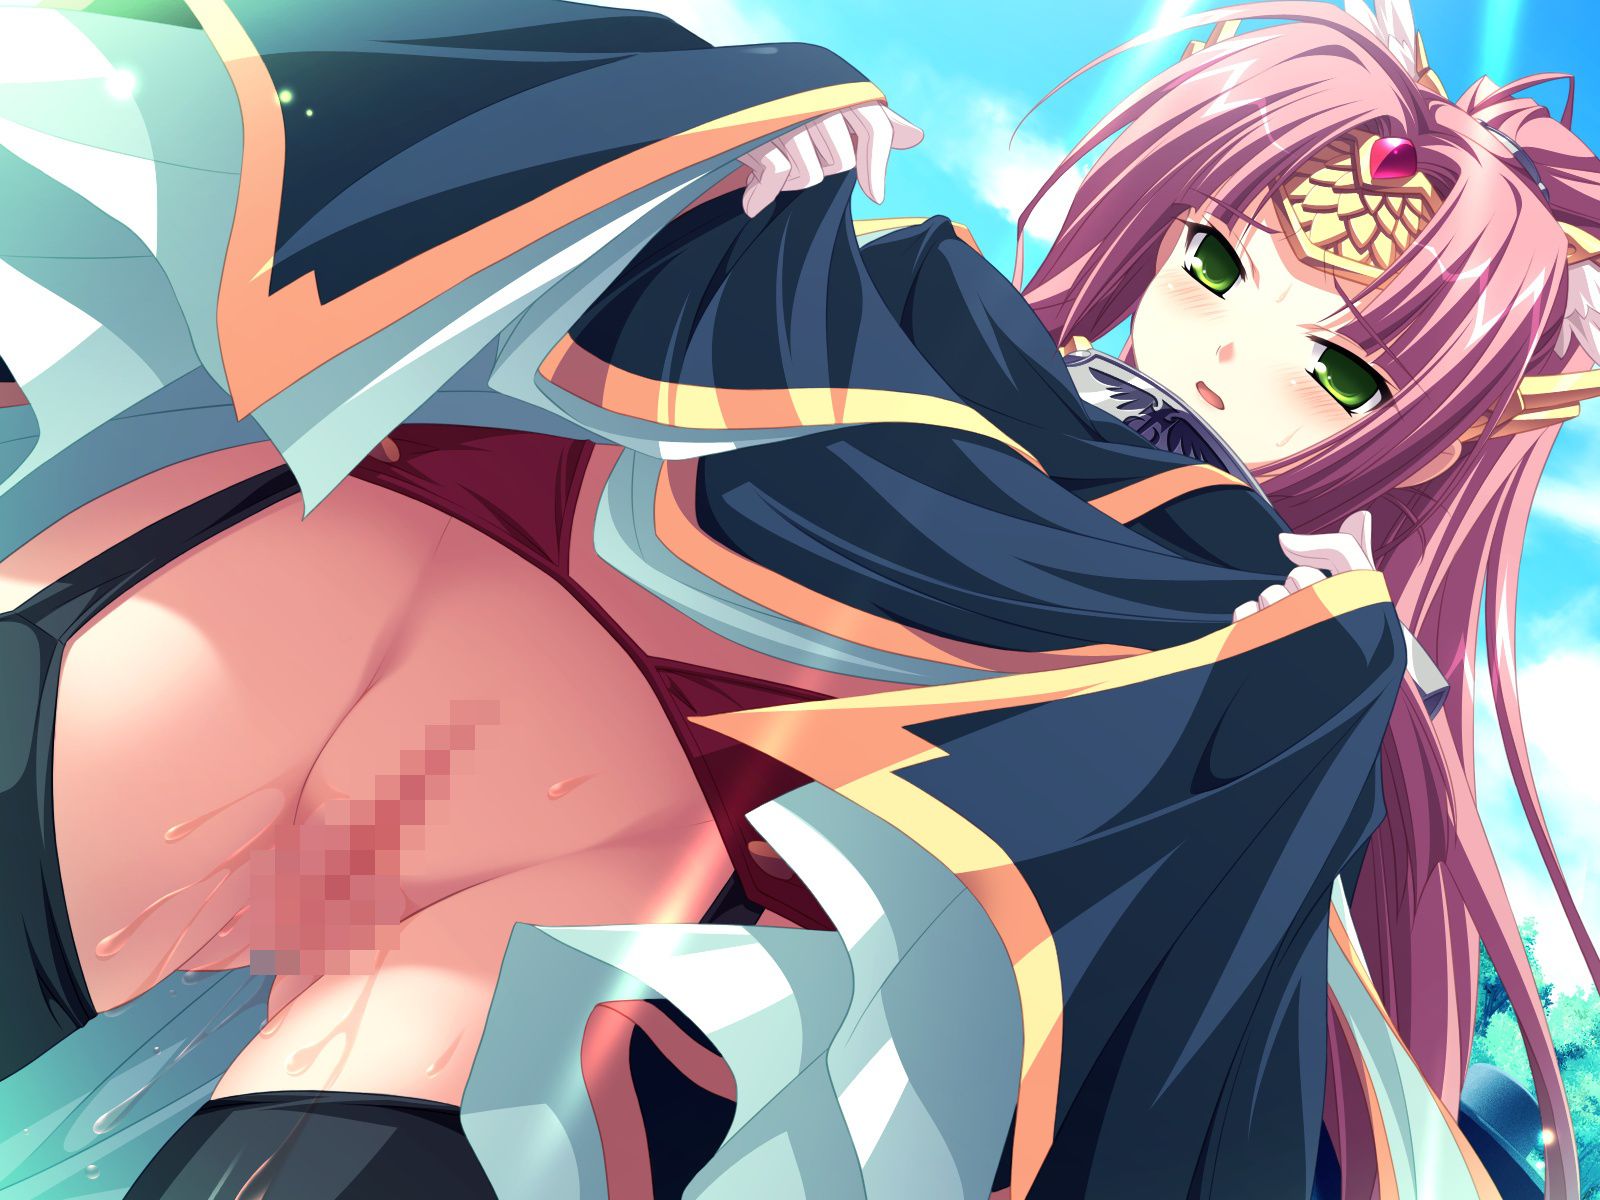 Steel flame Soleil - ChaosRegion-[18 PC Bishoujo game CG] erotic wallpapers and pictures part 1 4